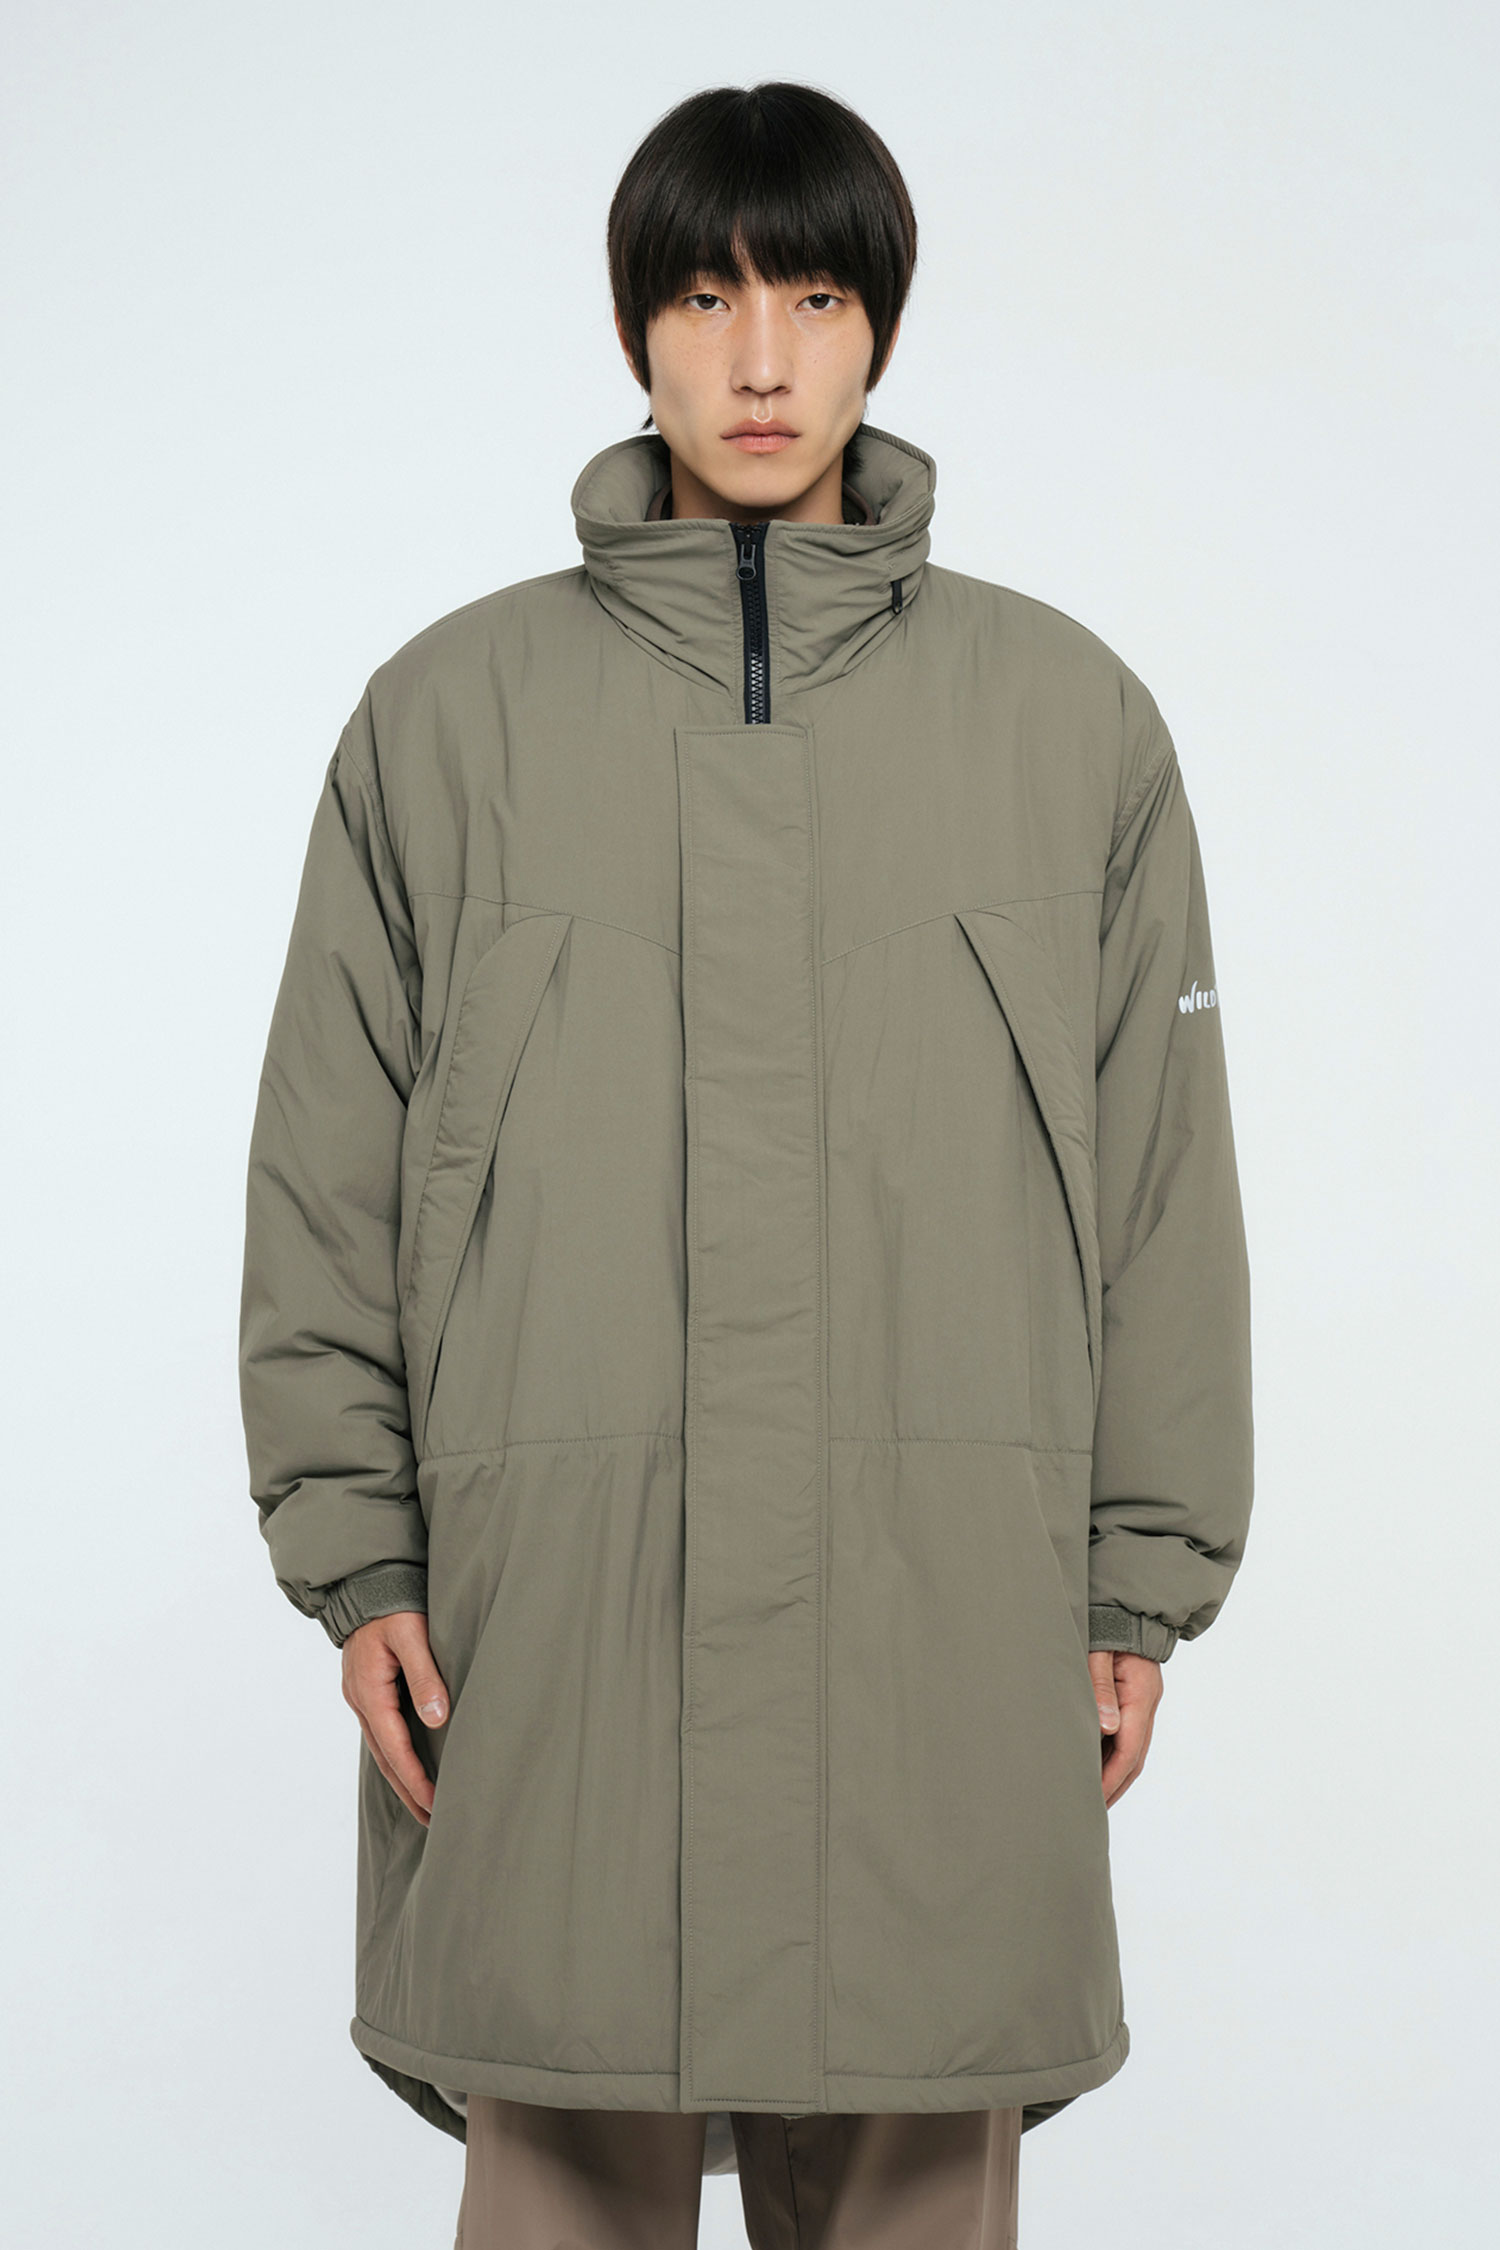 Wild Things × WIND AND SEA Ready Parka barcritic.com